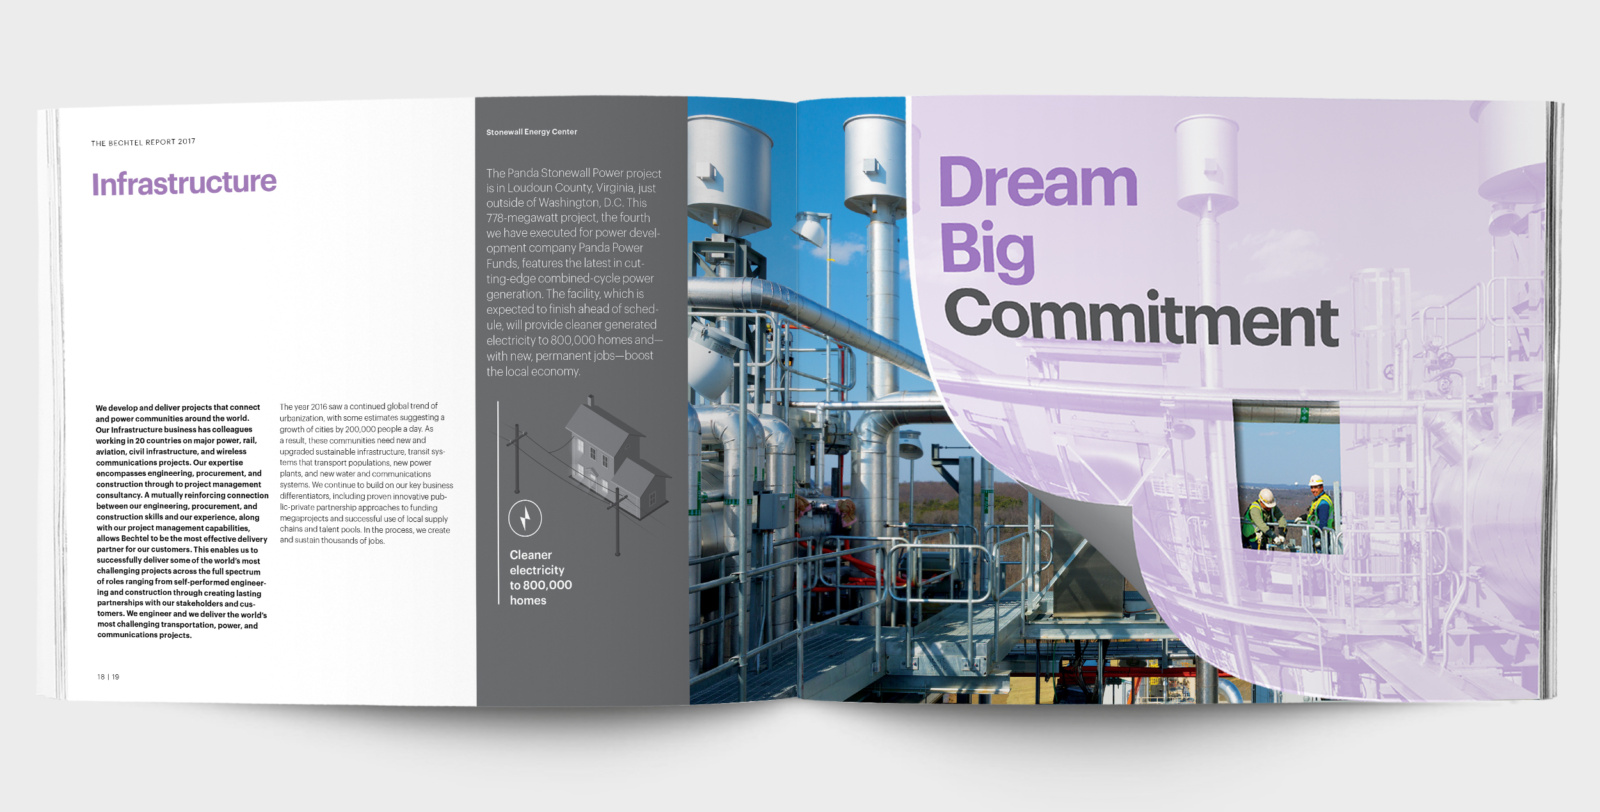 Open spread from the 2017 “Dream Big” Bechtel annual report design, showing a gatefold and die cut image reveal